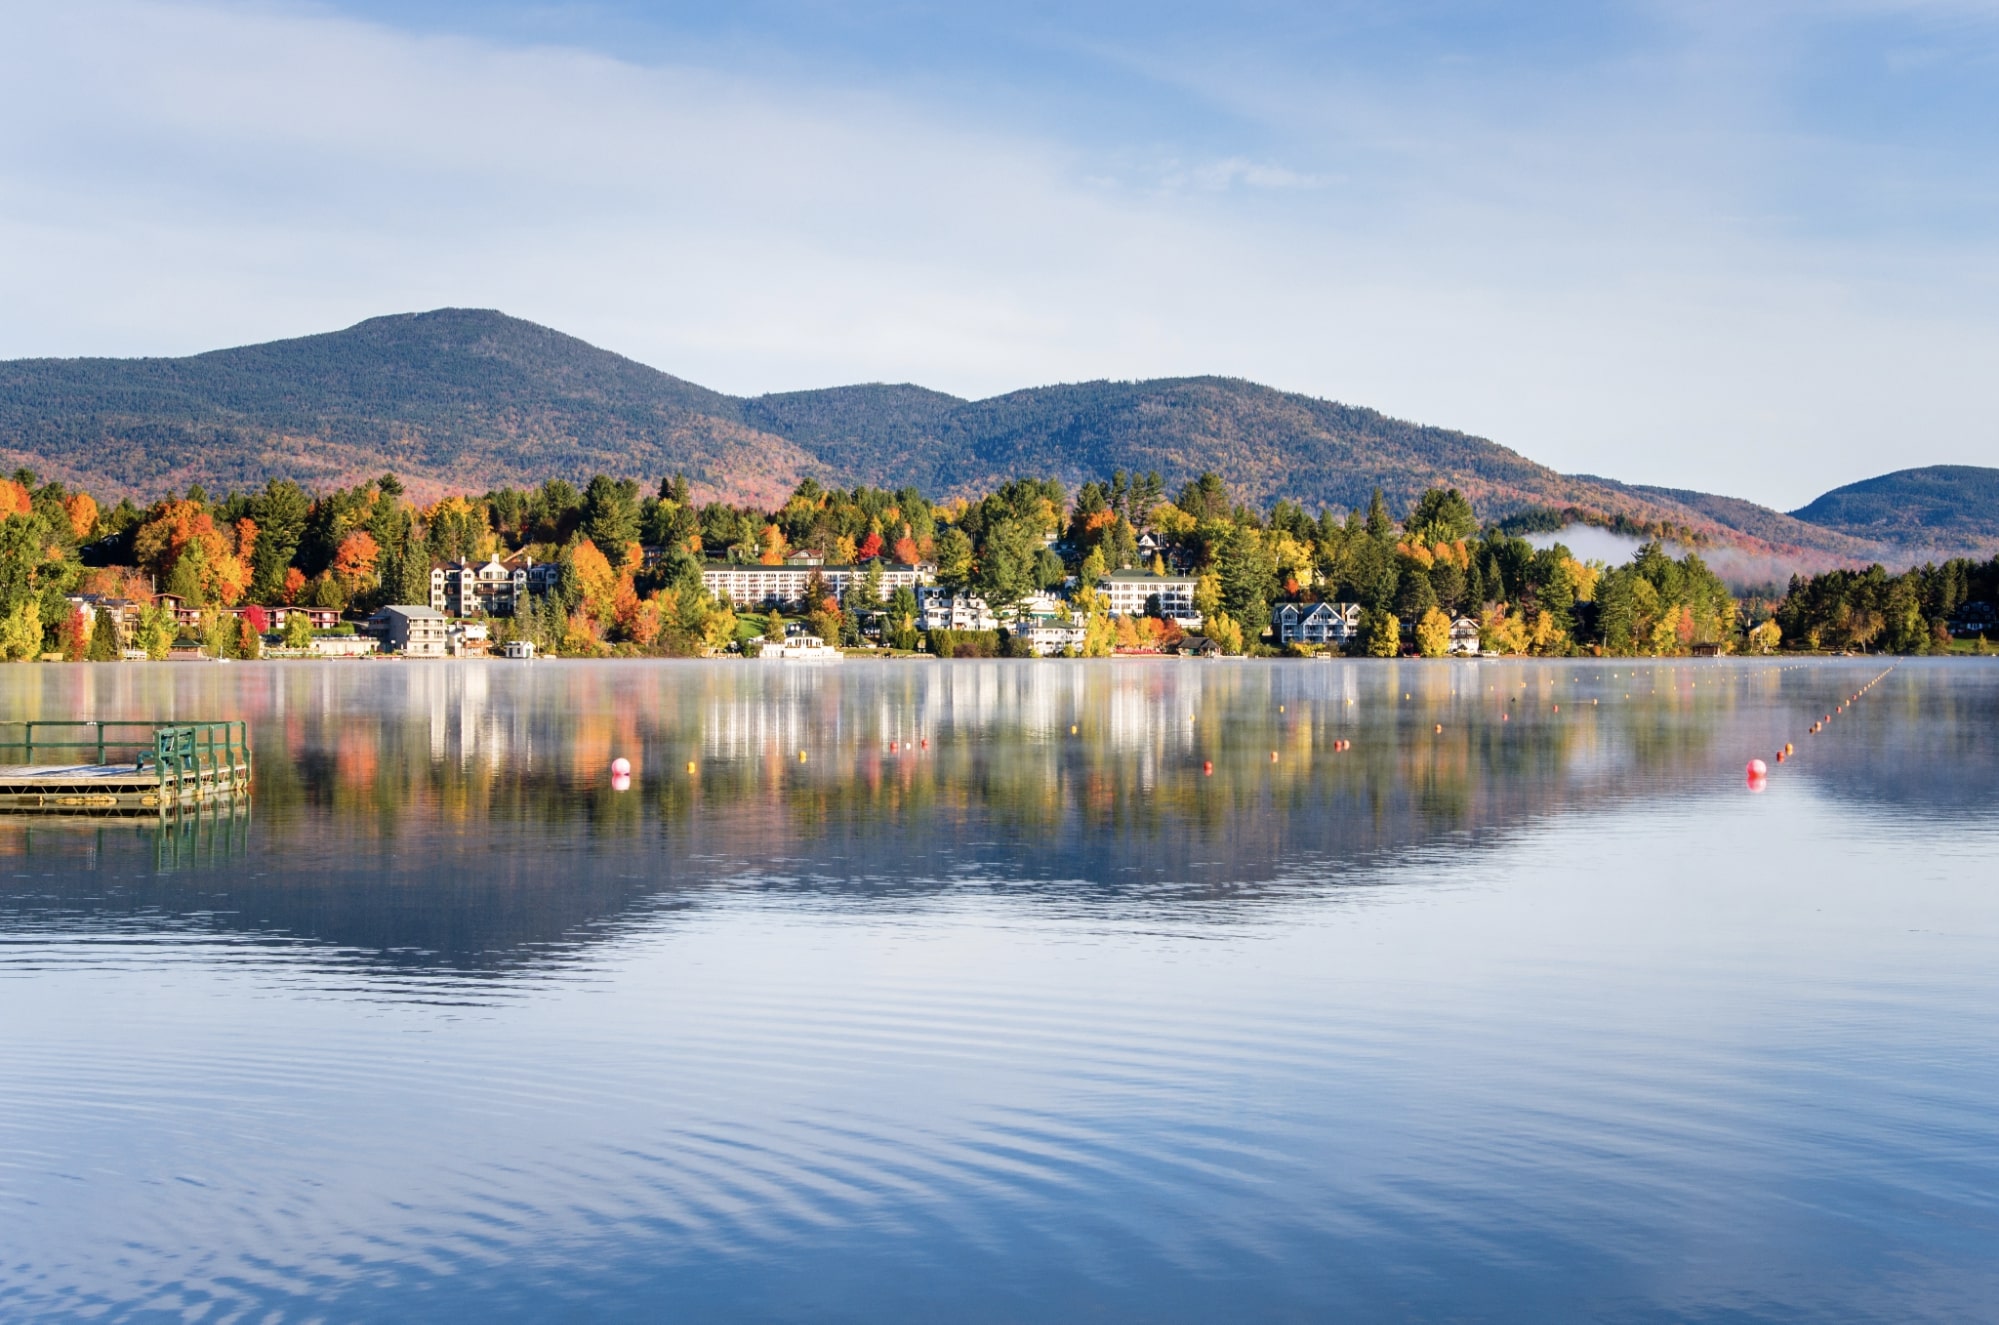 History of Lake Placid’s Olympic Village